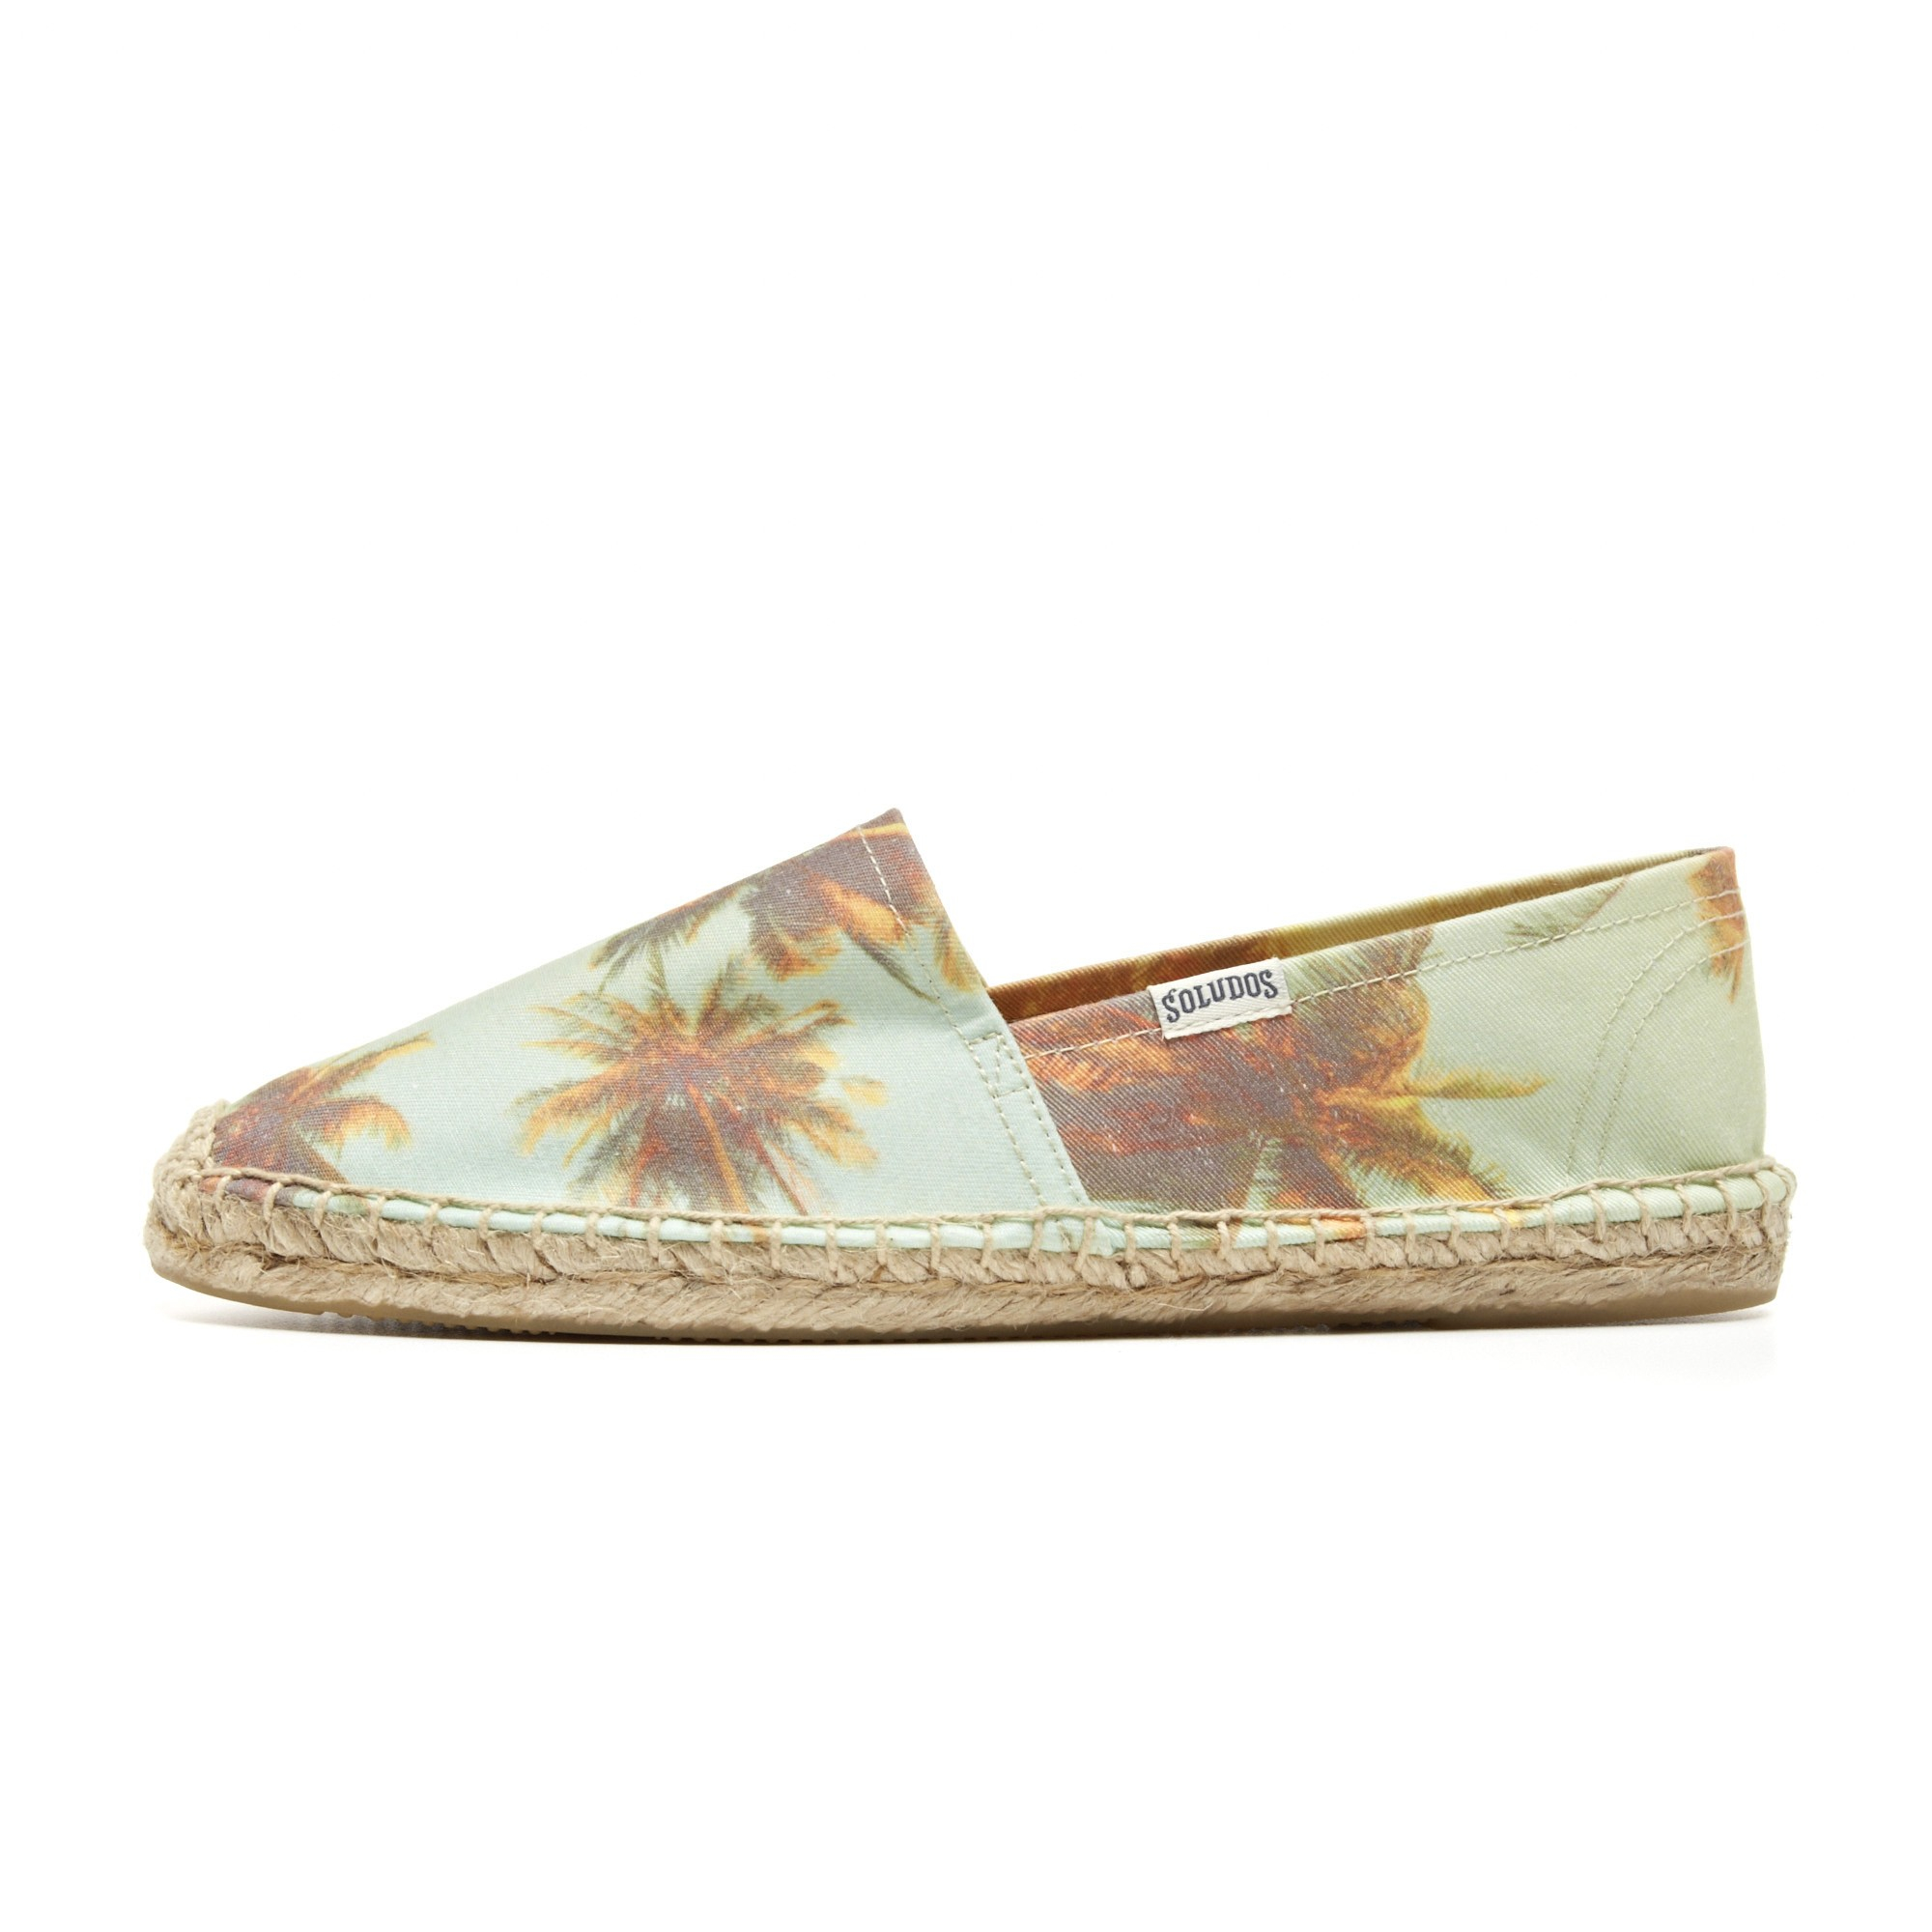 Soludos Paradise Espadrille Flat in Natural - Lyst